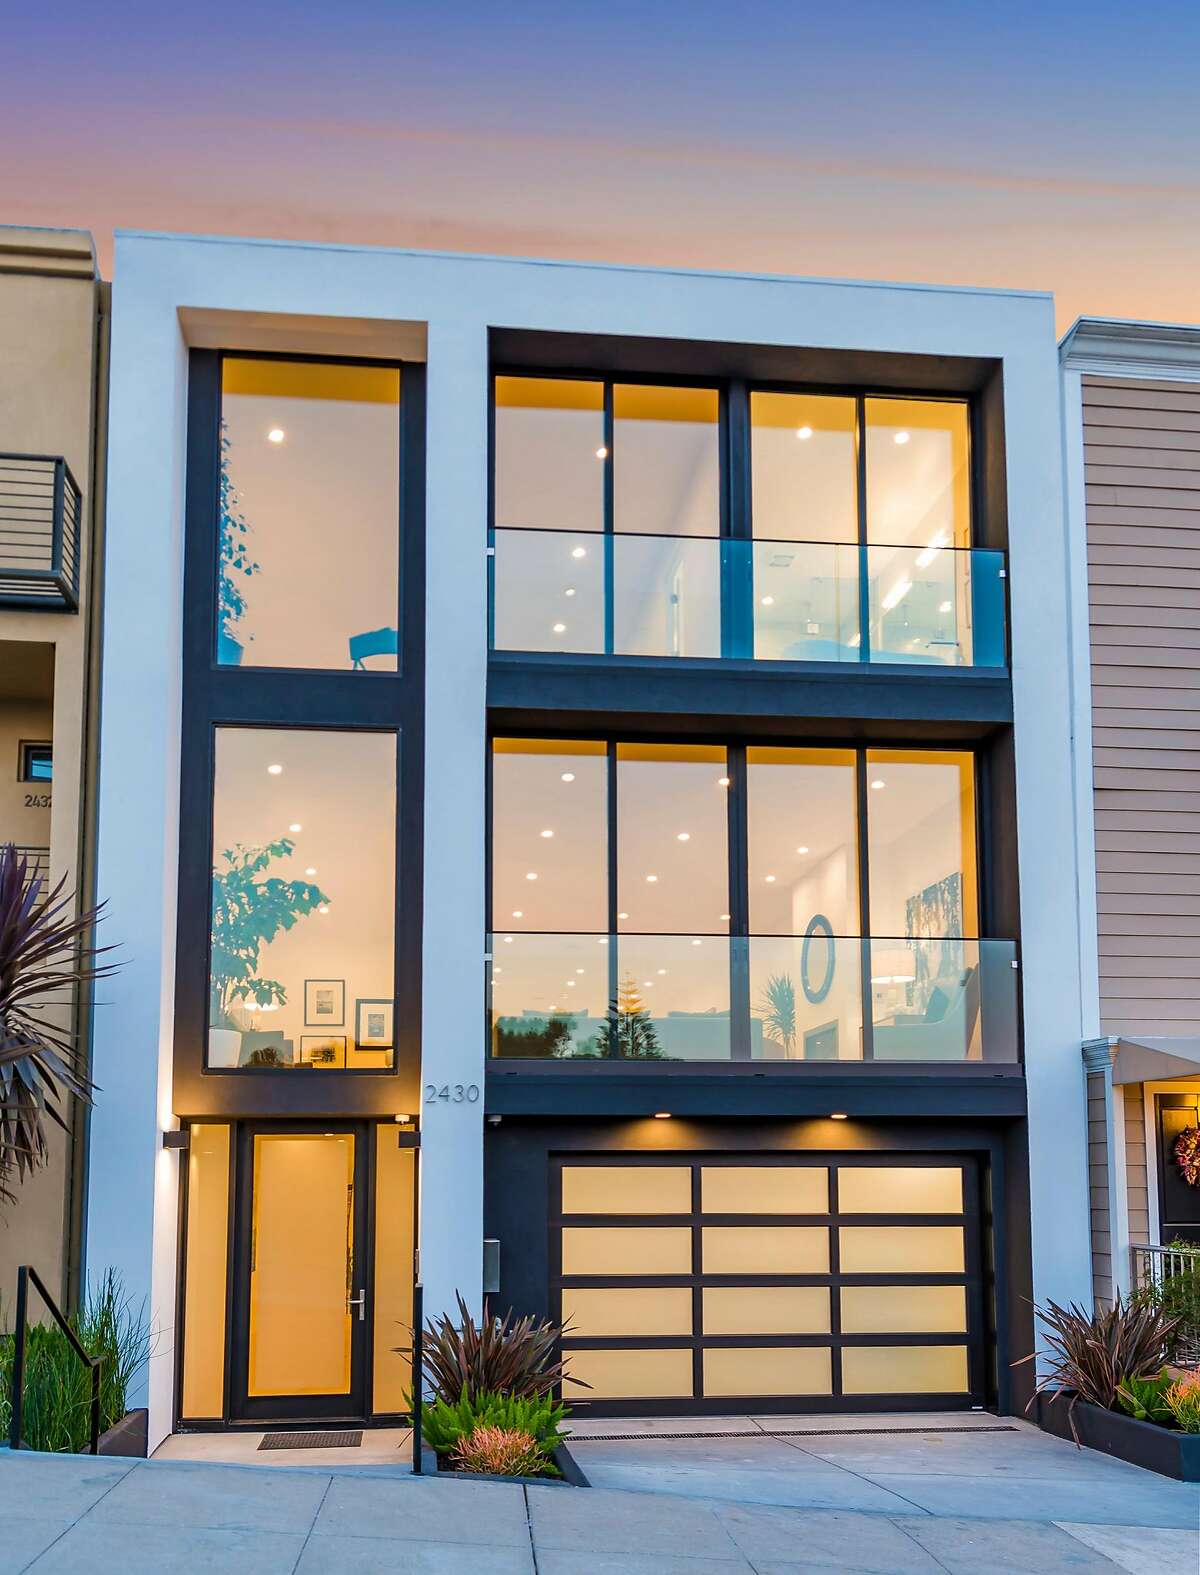 2430 Castro St. in Noe Valley is a four-bedroom contemporary available for $4.395 million.